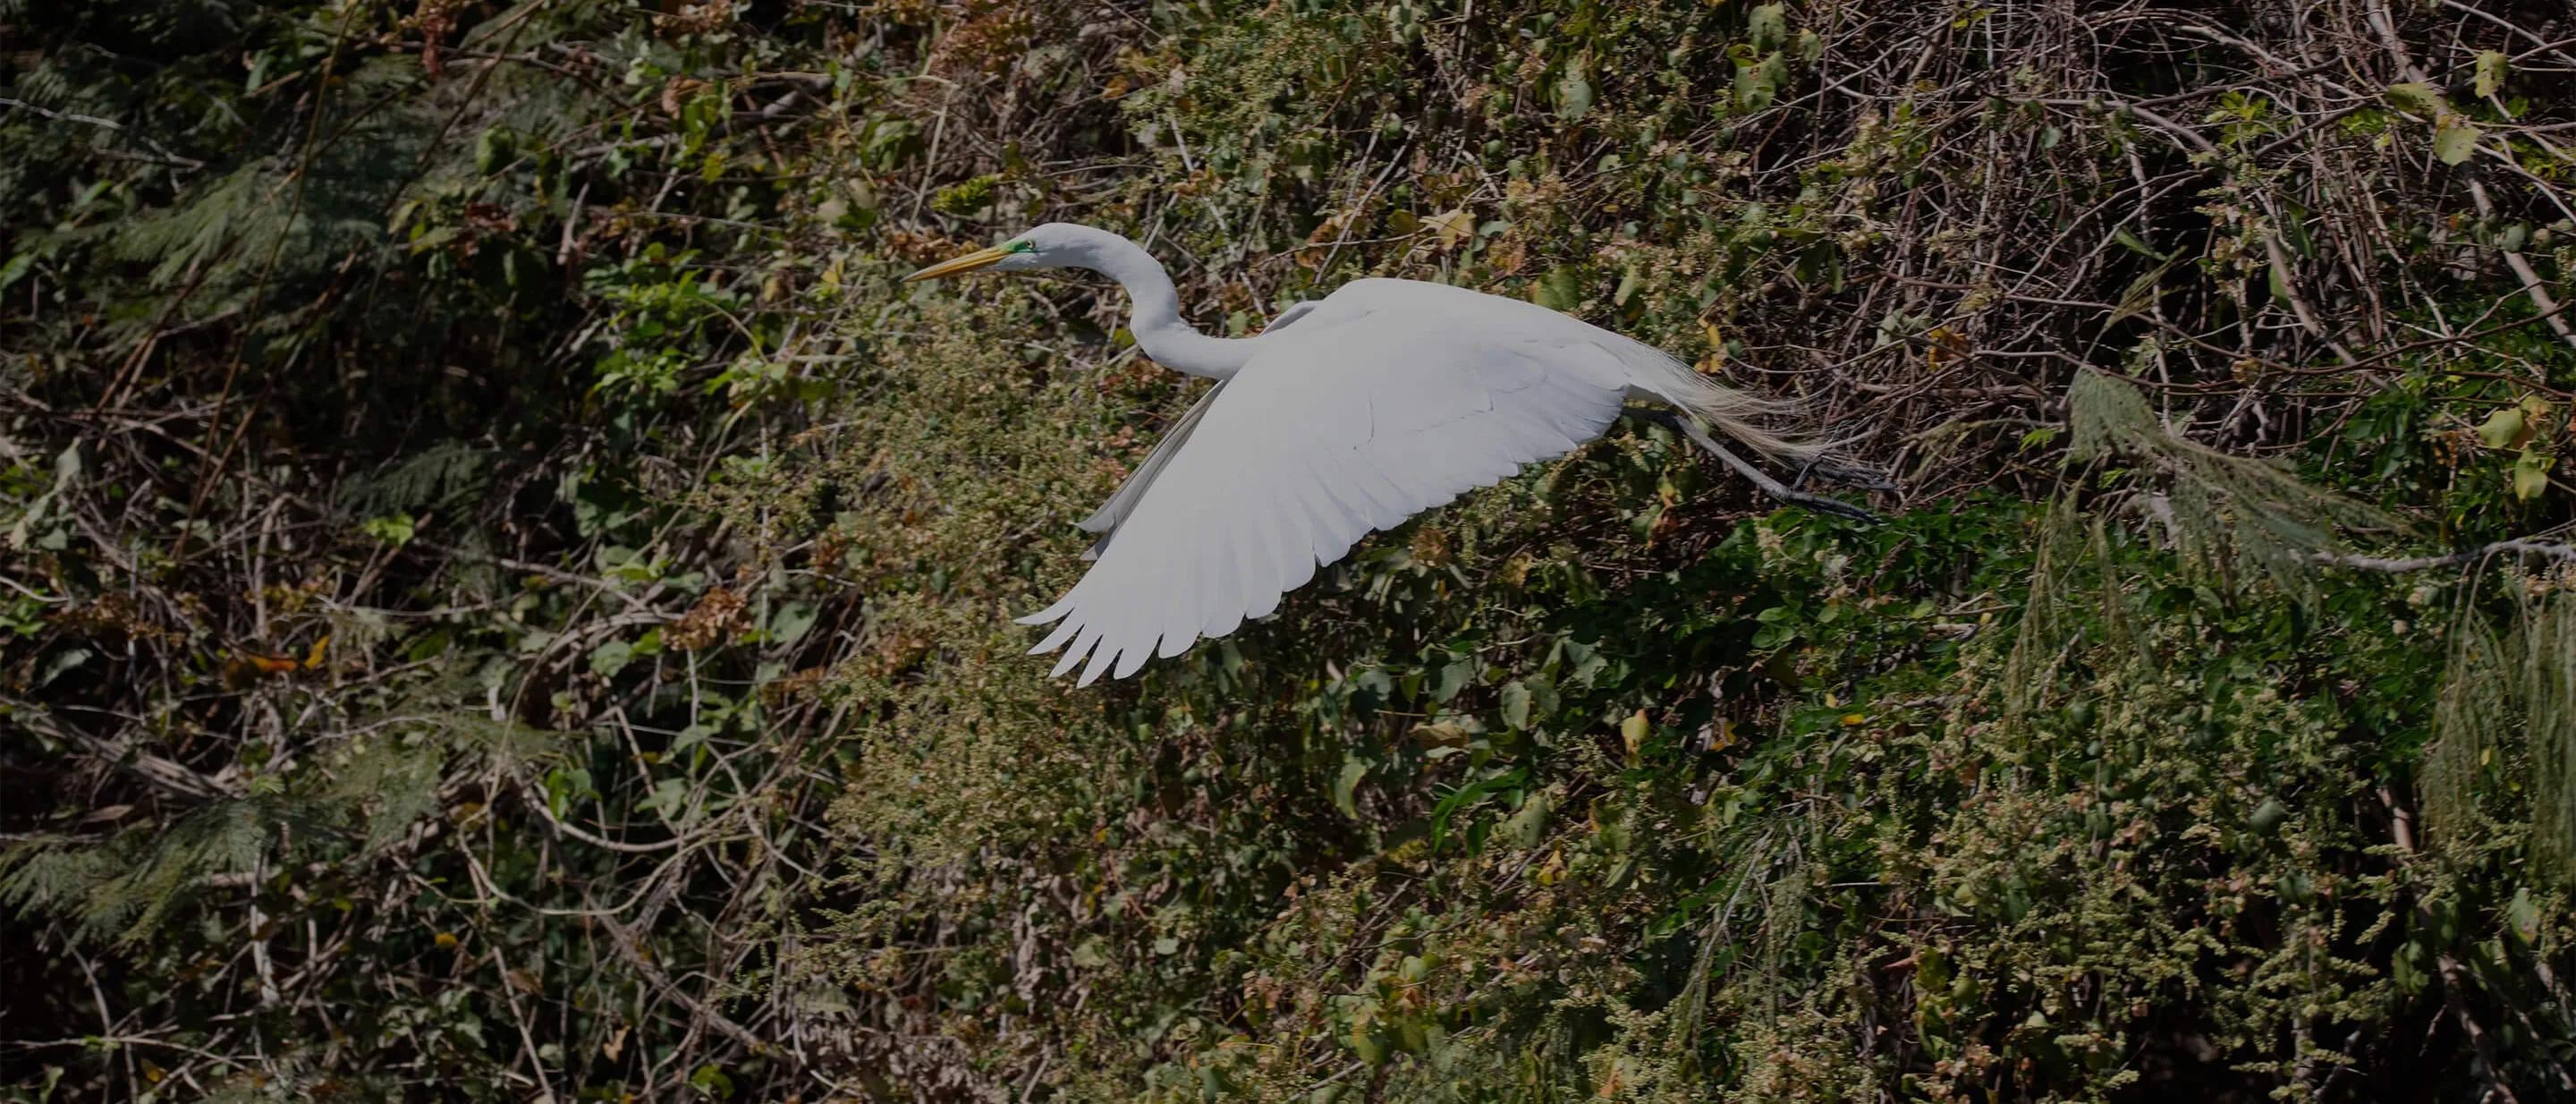 A large white bird in mid-flight in forest setting